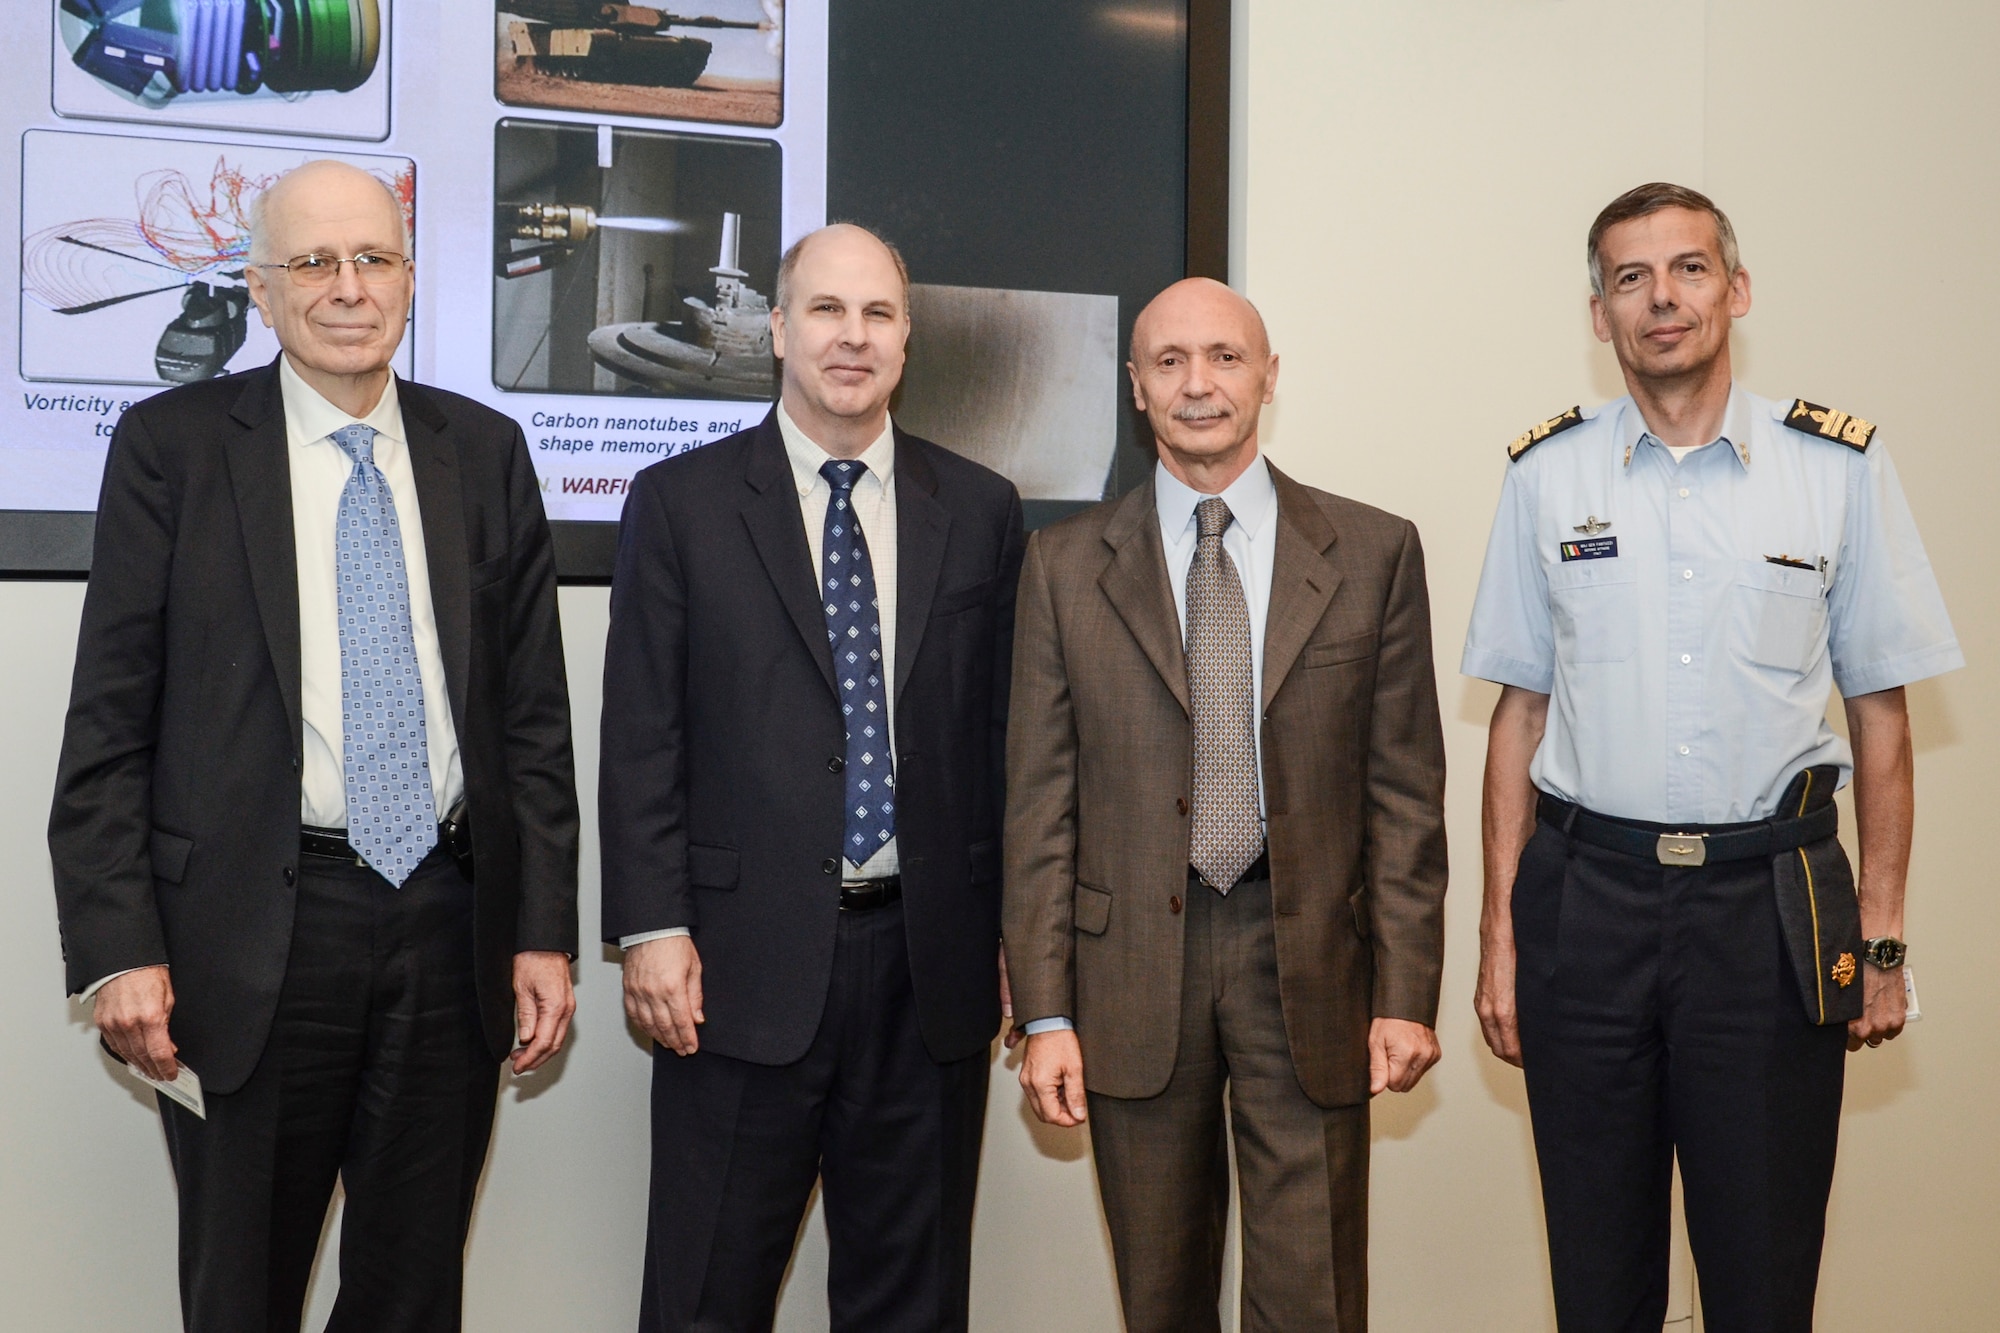 Basic research collaboration at the Air Force Office of Scientific Research (AFOSR) and the Embassy of Italy technical exchange meeting in held in Arlington, Va. 